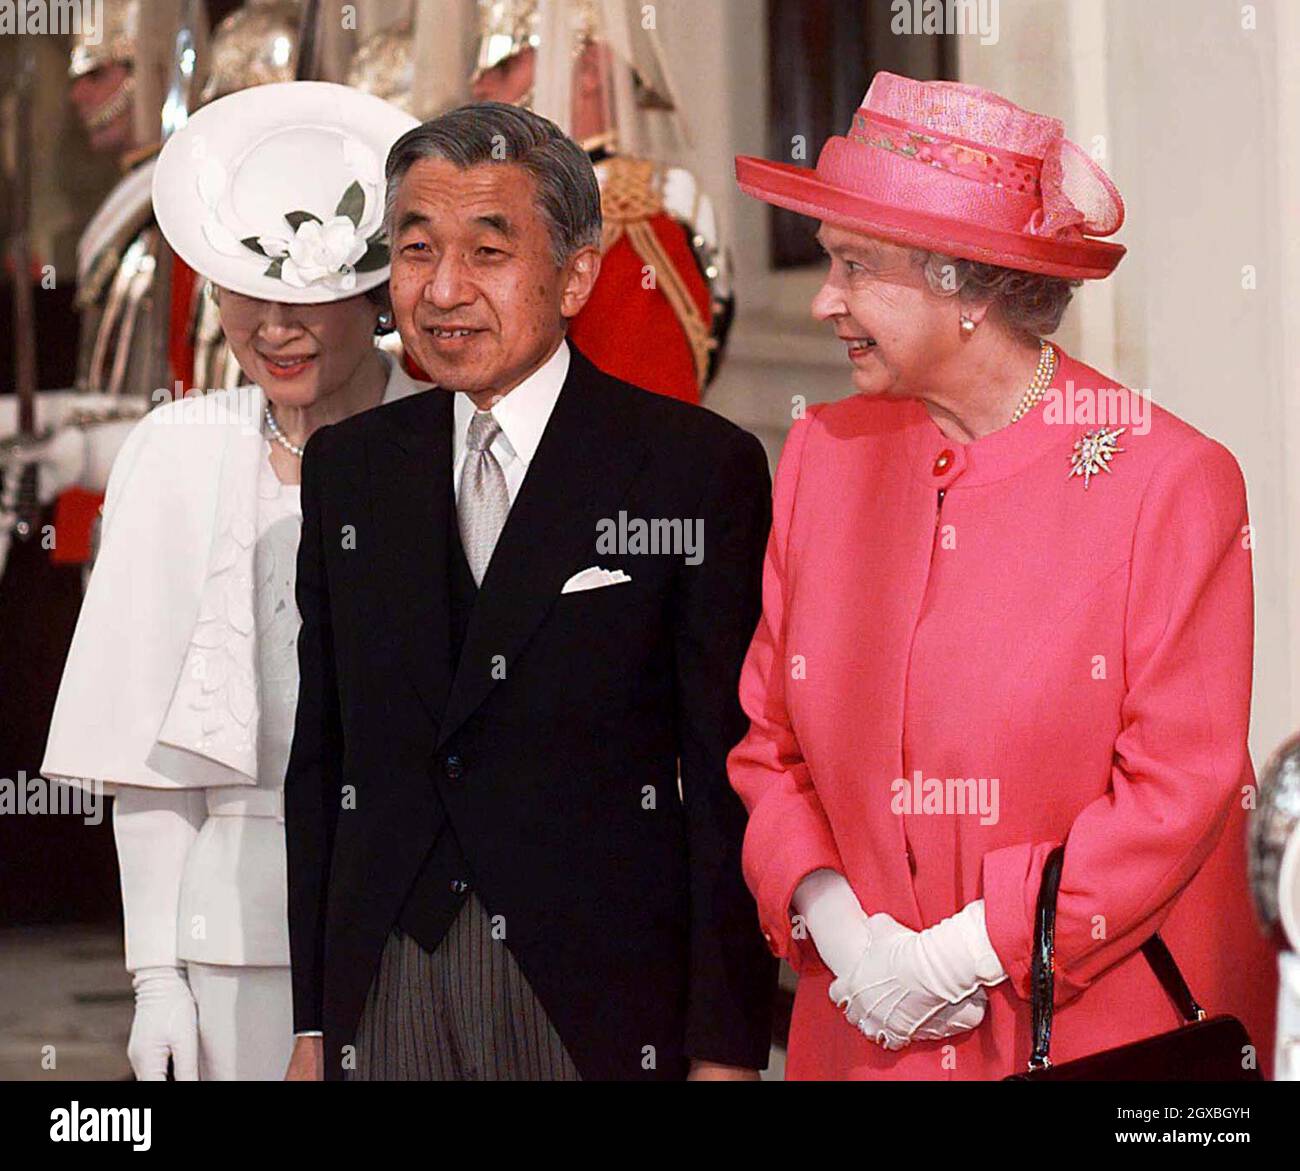 The Queen (right) arrives at Buckingham Palace with the Emperor Akihito and the Empress Michiko of Japan on the first day of their five-day state visit. Â©Anwar Hussein/allactiondigital.com  Stock Photo